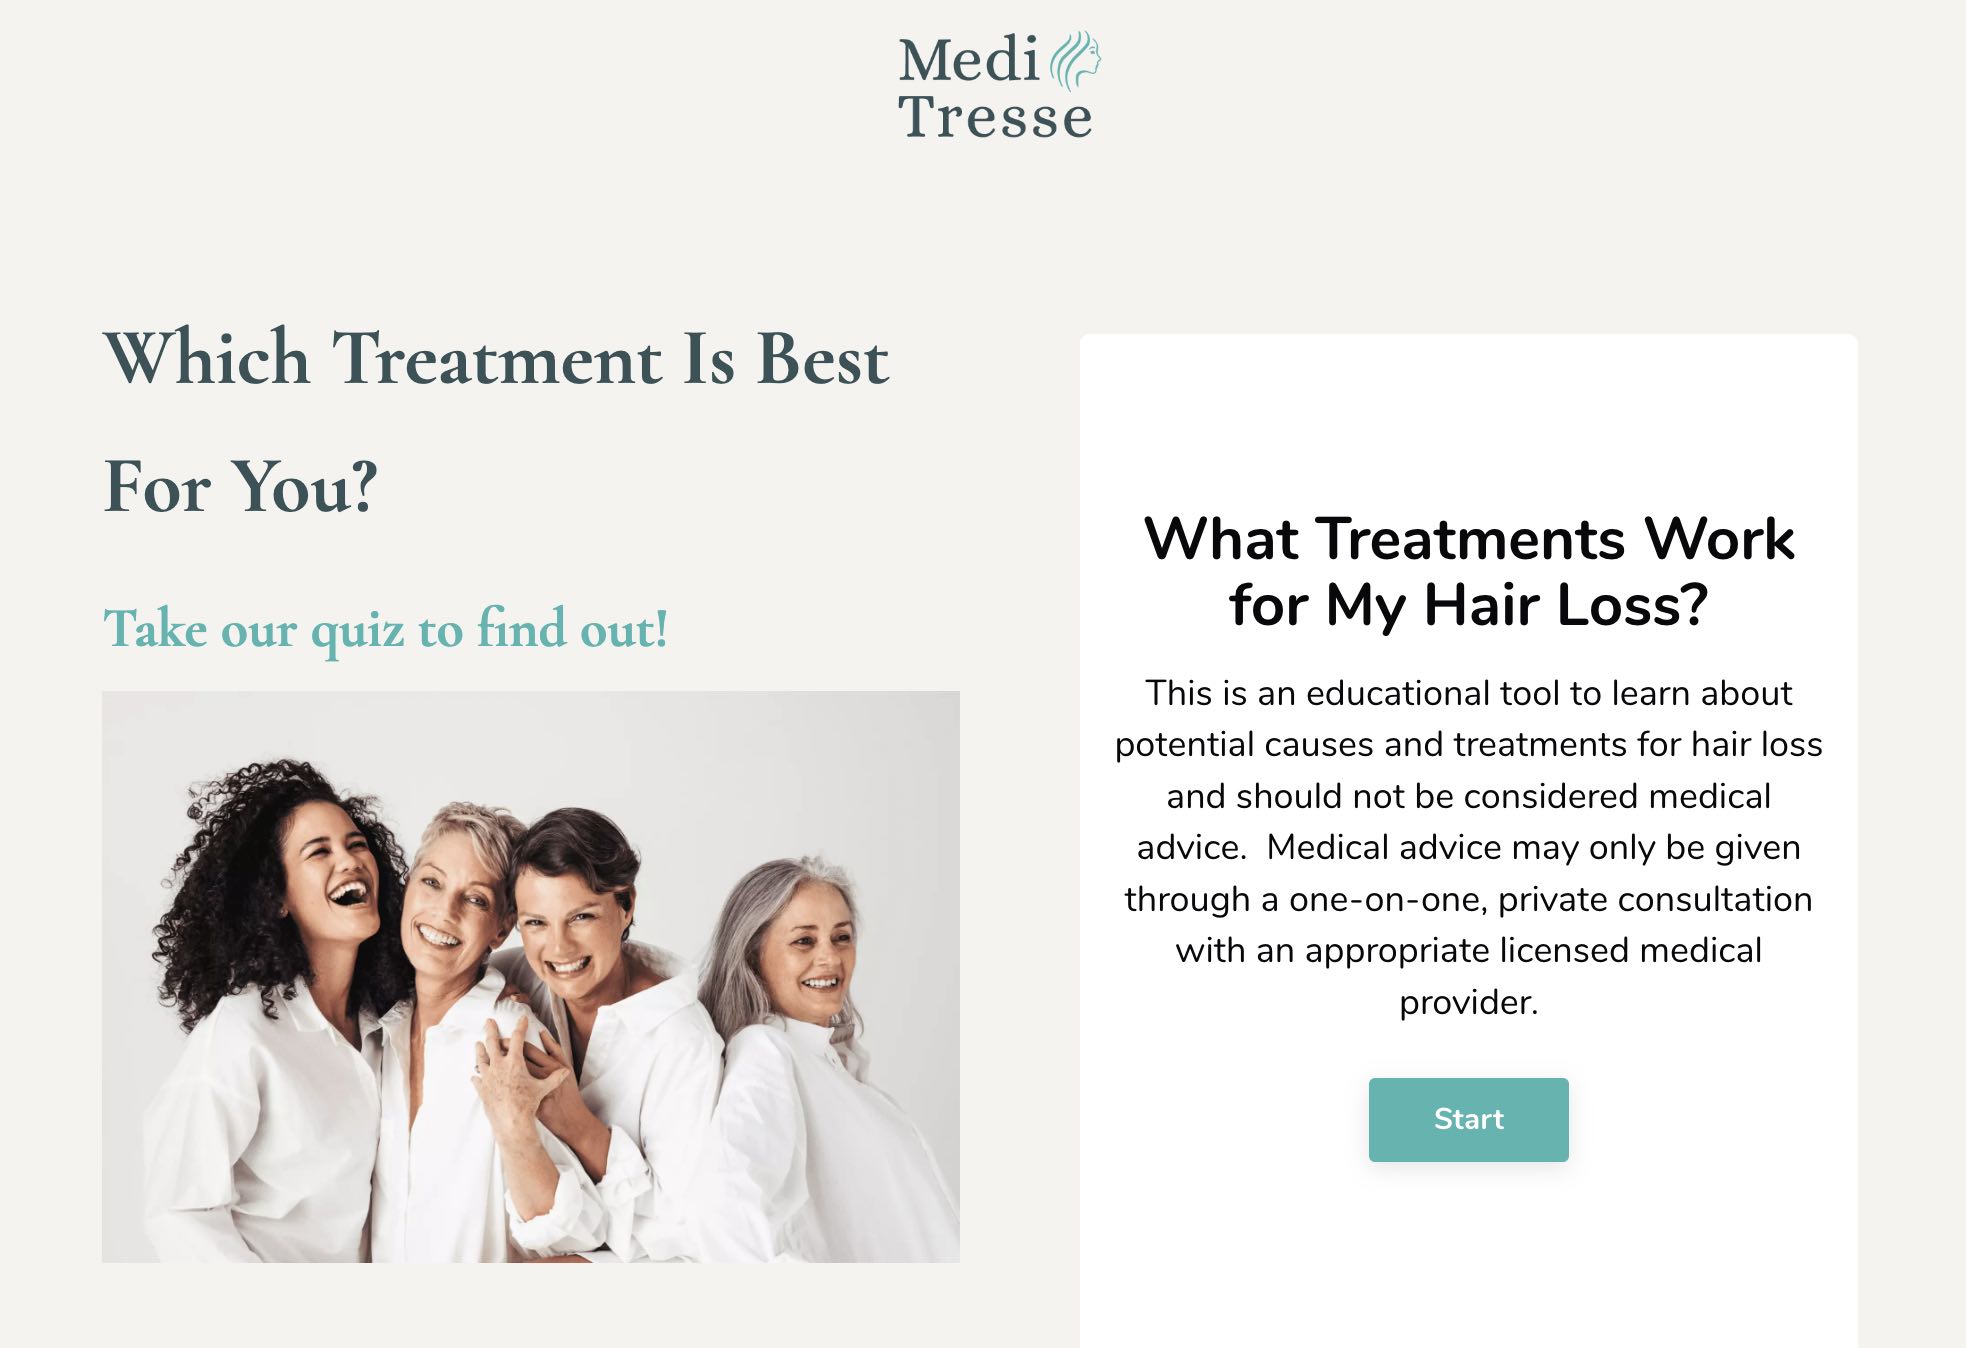 Medi Tresse offers a Quiz for What Treatments Work for My Hair Loss.